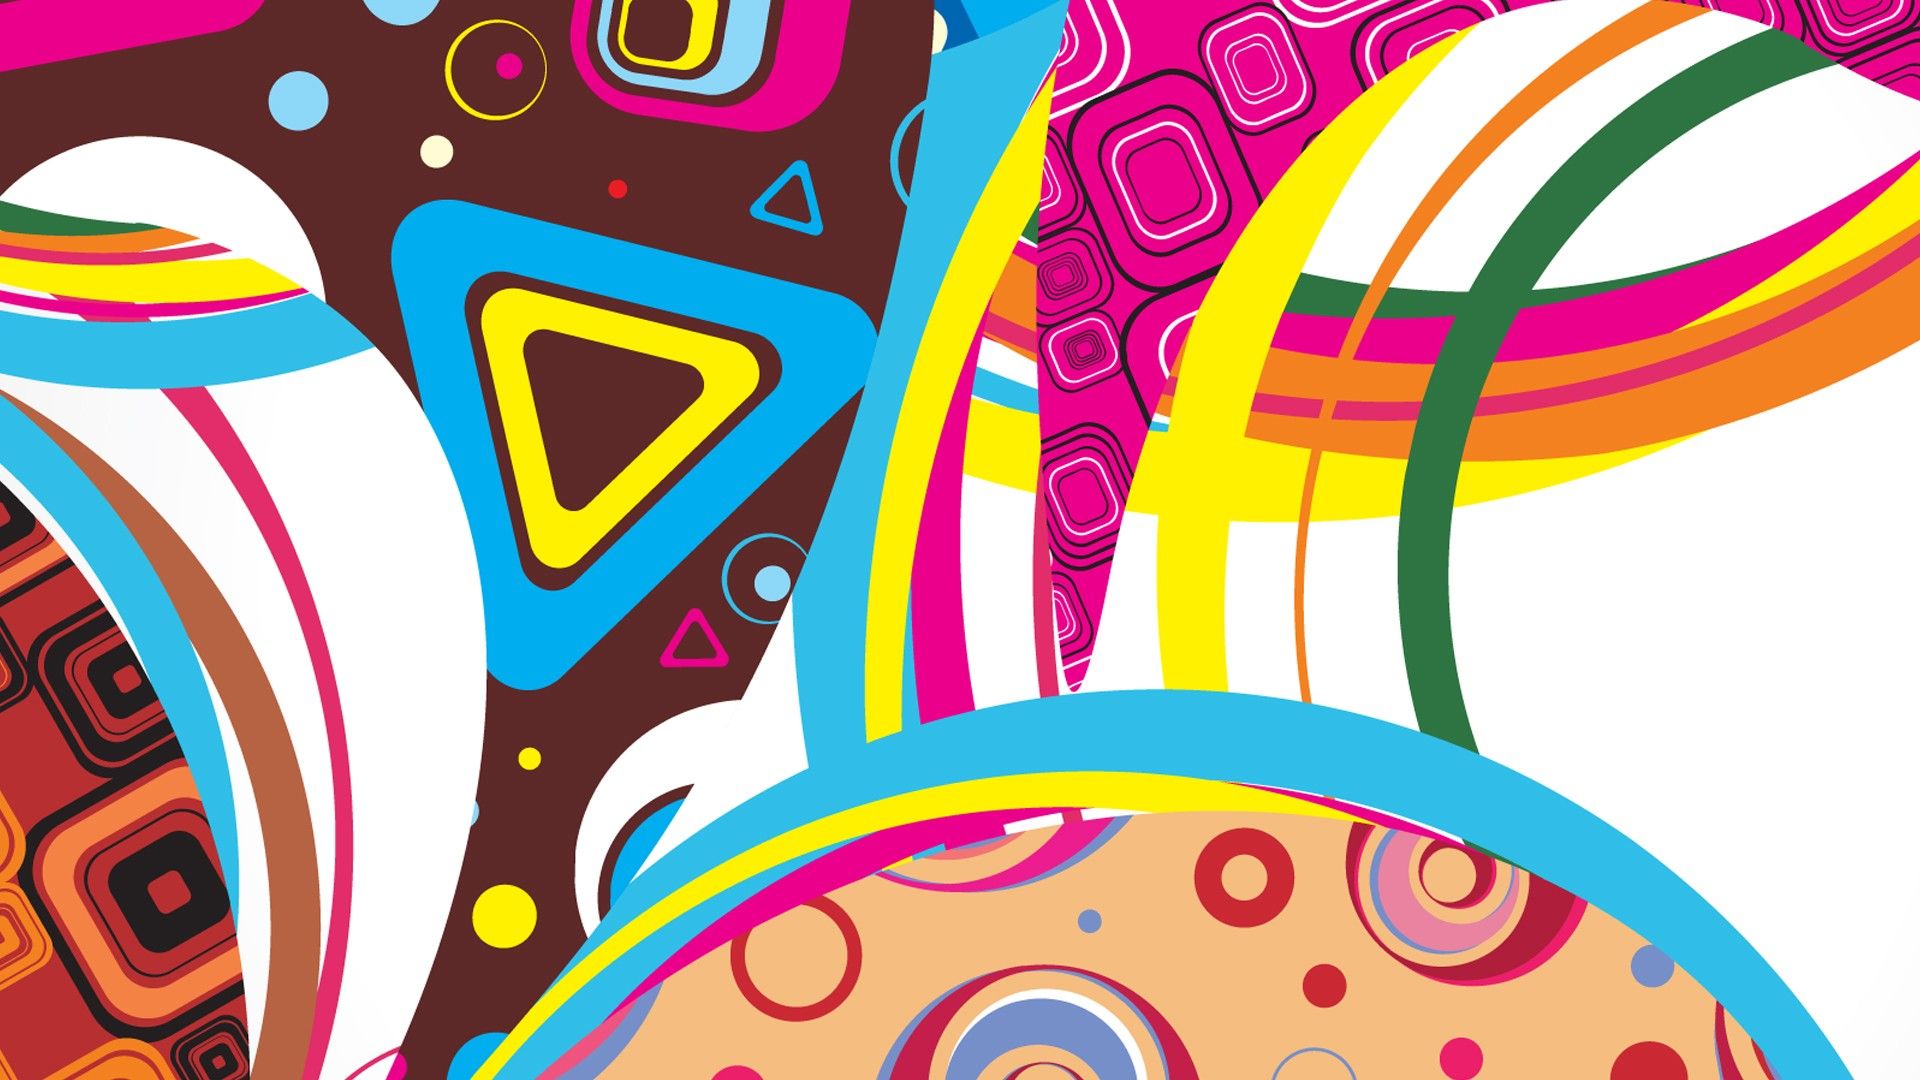 Wallpaper, colorful, illustration, abstract, cartoon, pattern, geometry, line, font, clip art 1920x1080